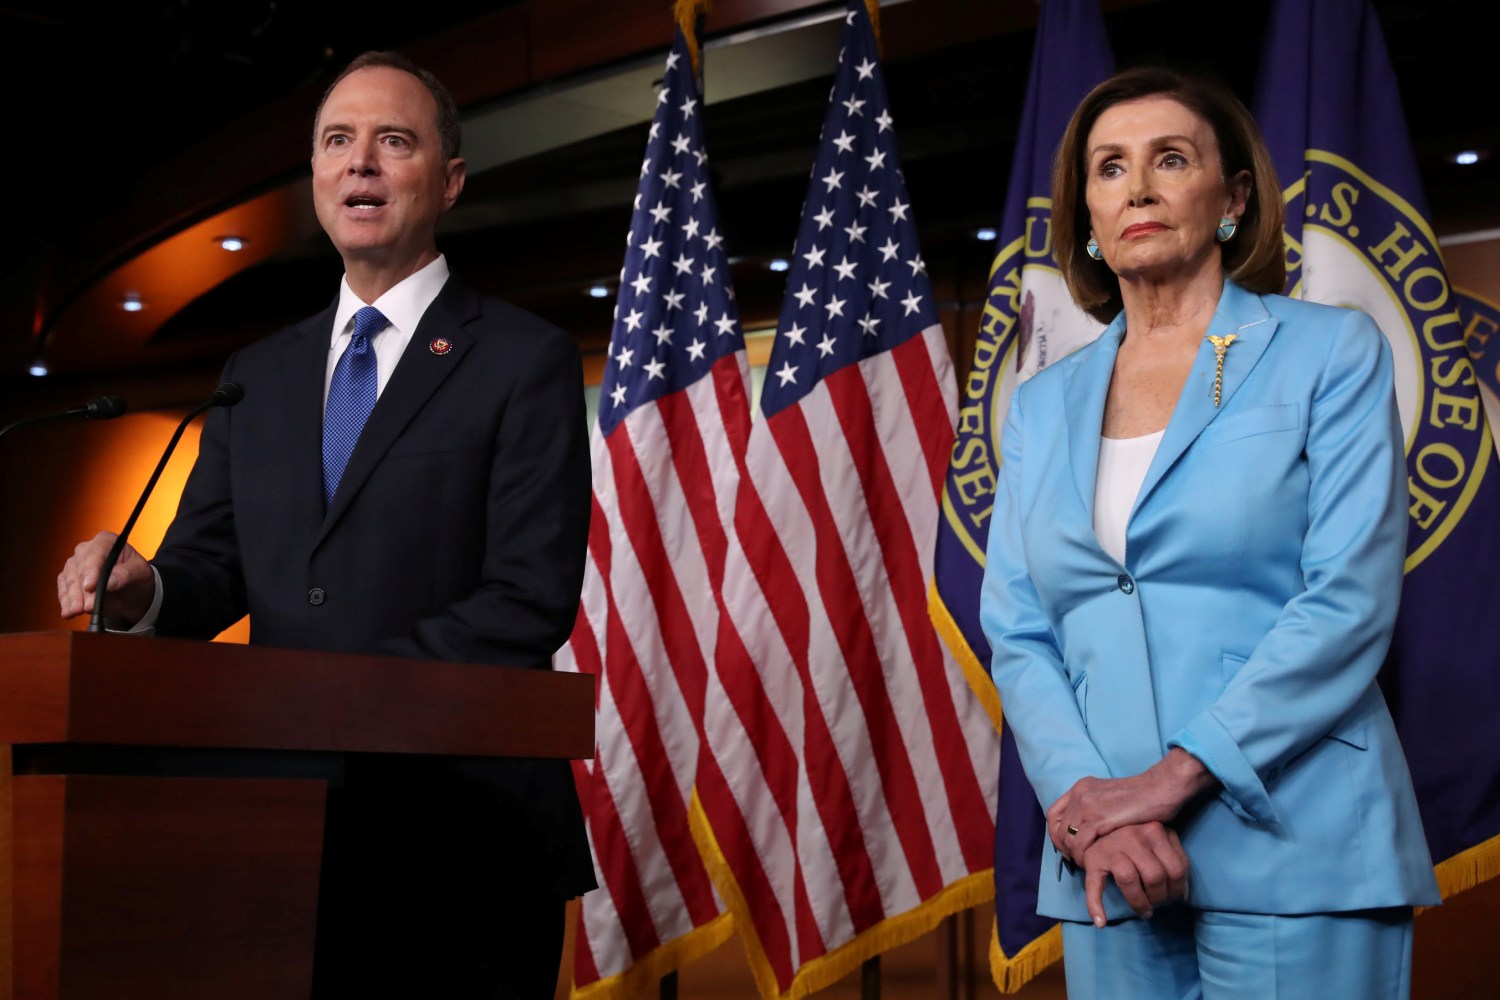 U.S. House Intelligence Committee Chairman Adam Schiff (D-CA) joins Speaker of the House Nancy Pelosi to speak about Democratic legislative priorities and impeachment inquiry plans during her weekly news conference at the U.S. Capitol in Washington, U.S., October 2, 2019. REUTERS/Jonathan Ernst - RC198FE9B500